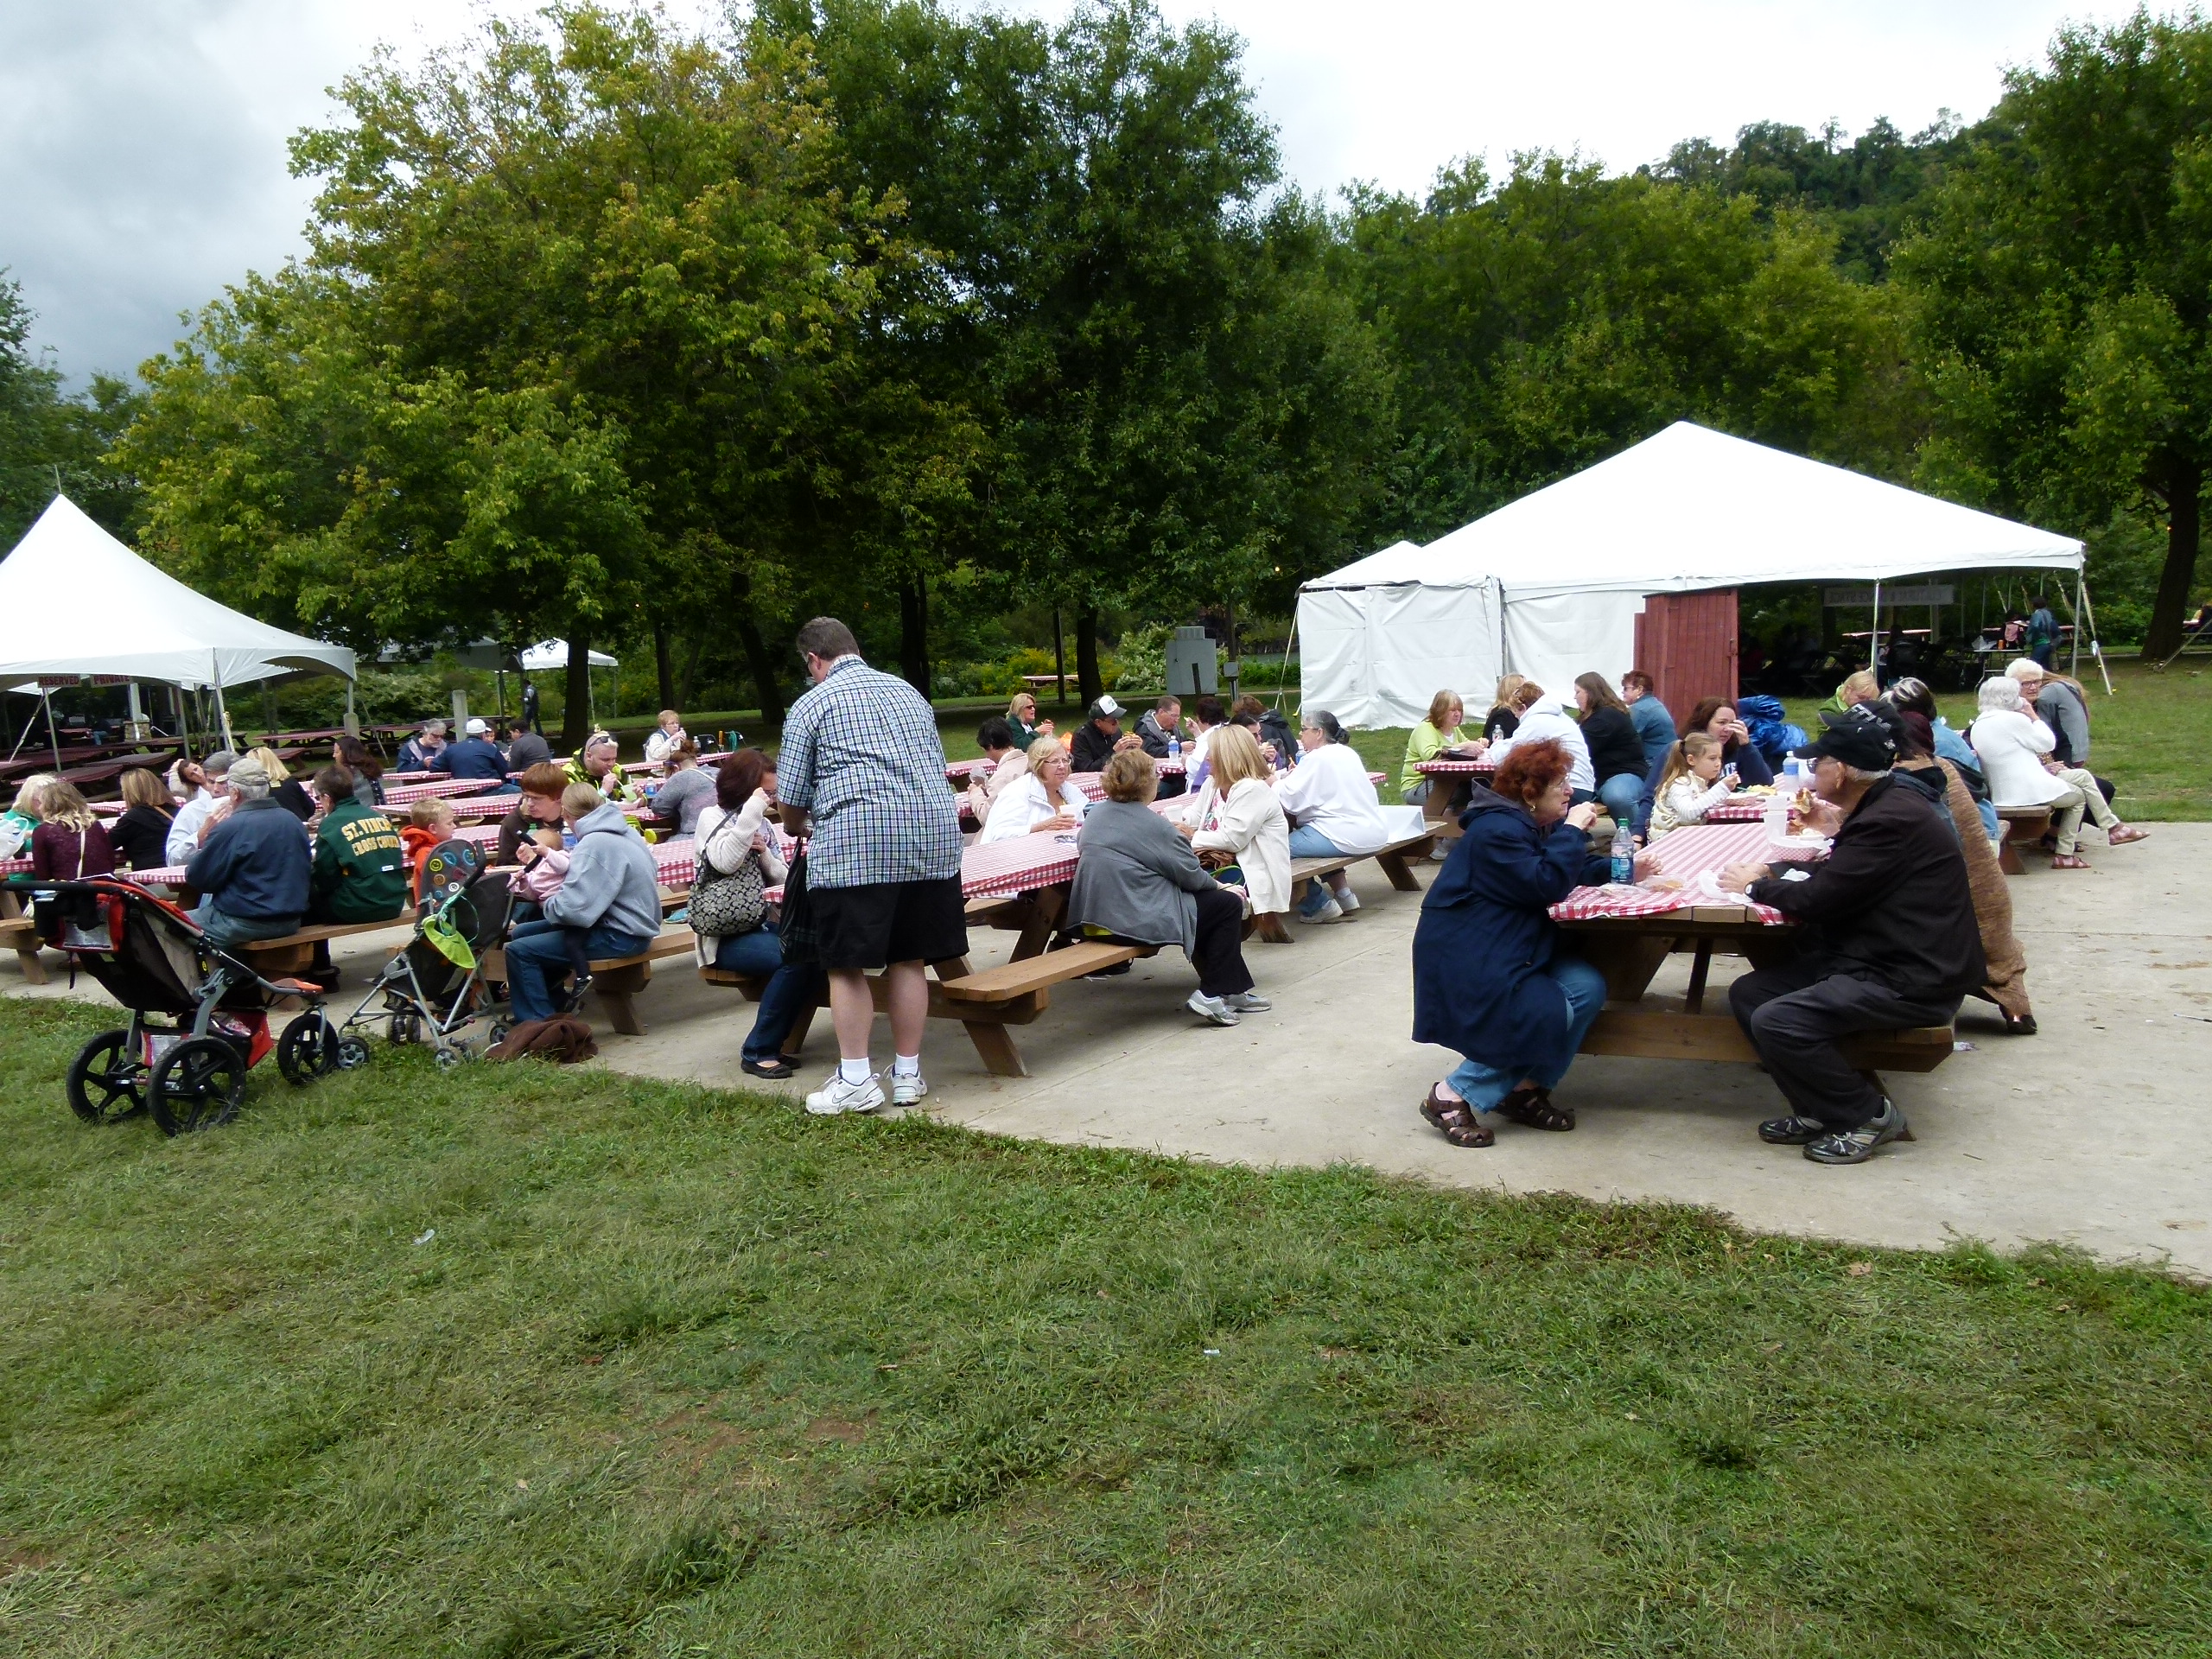 Friends and families relax and eat in the picnic area.